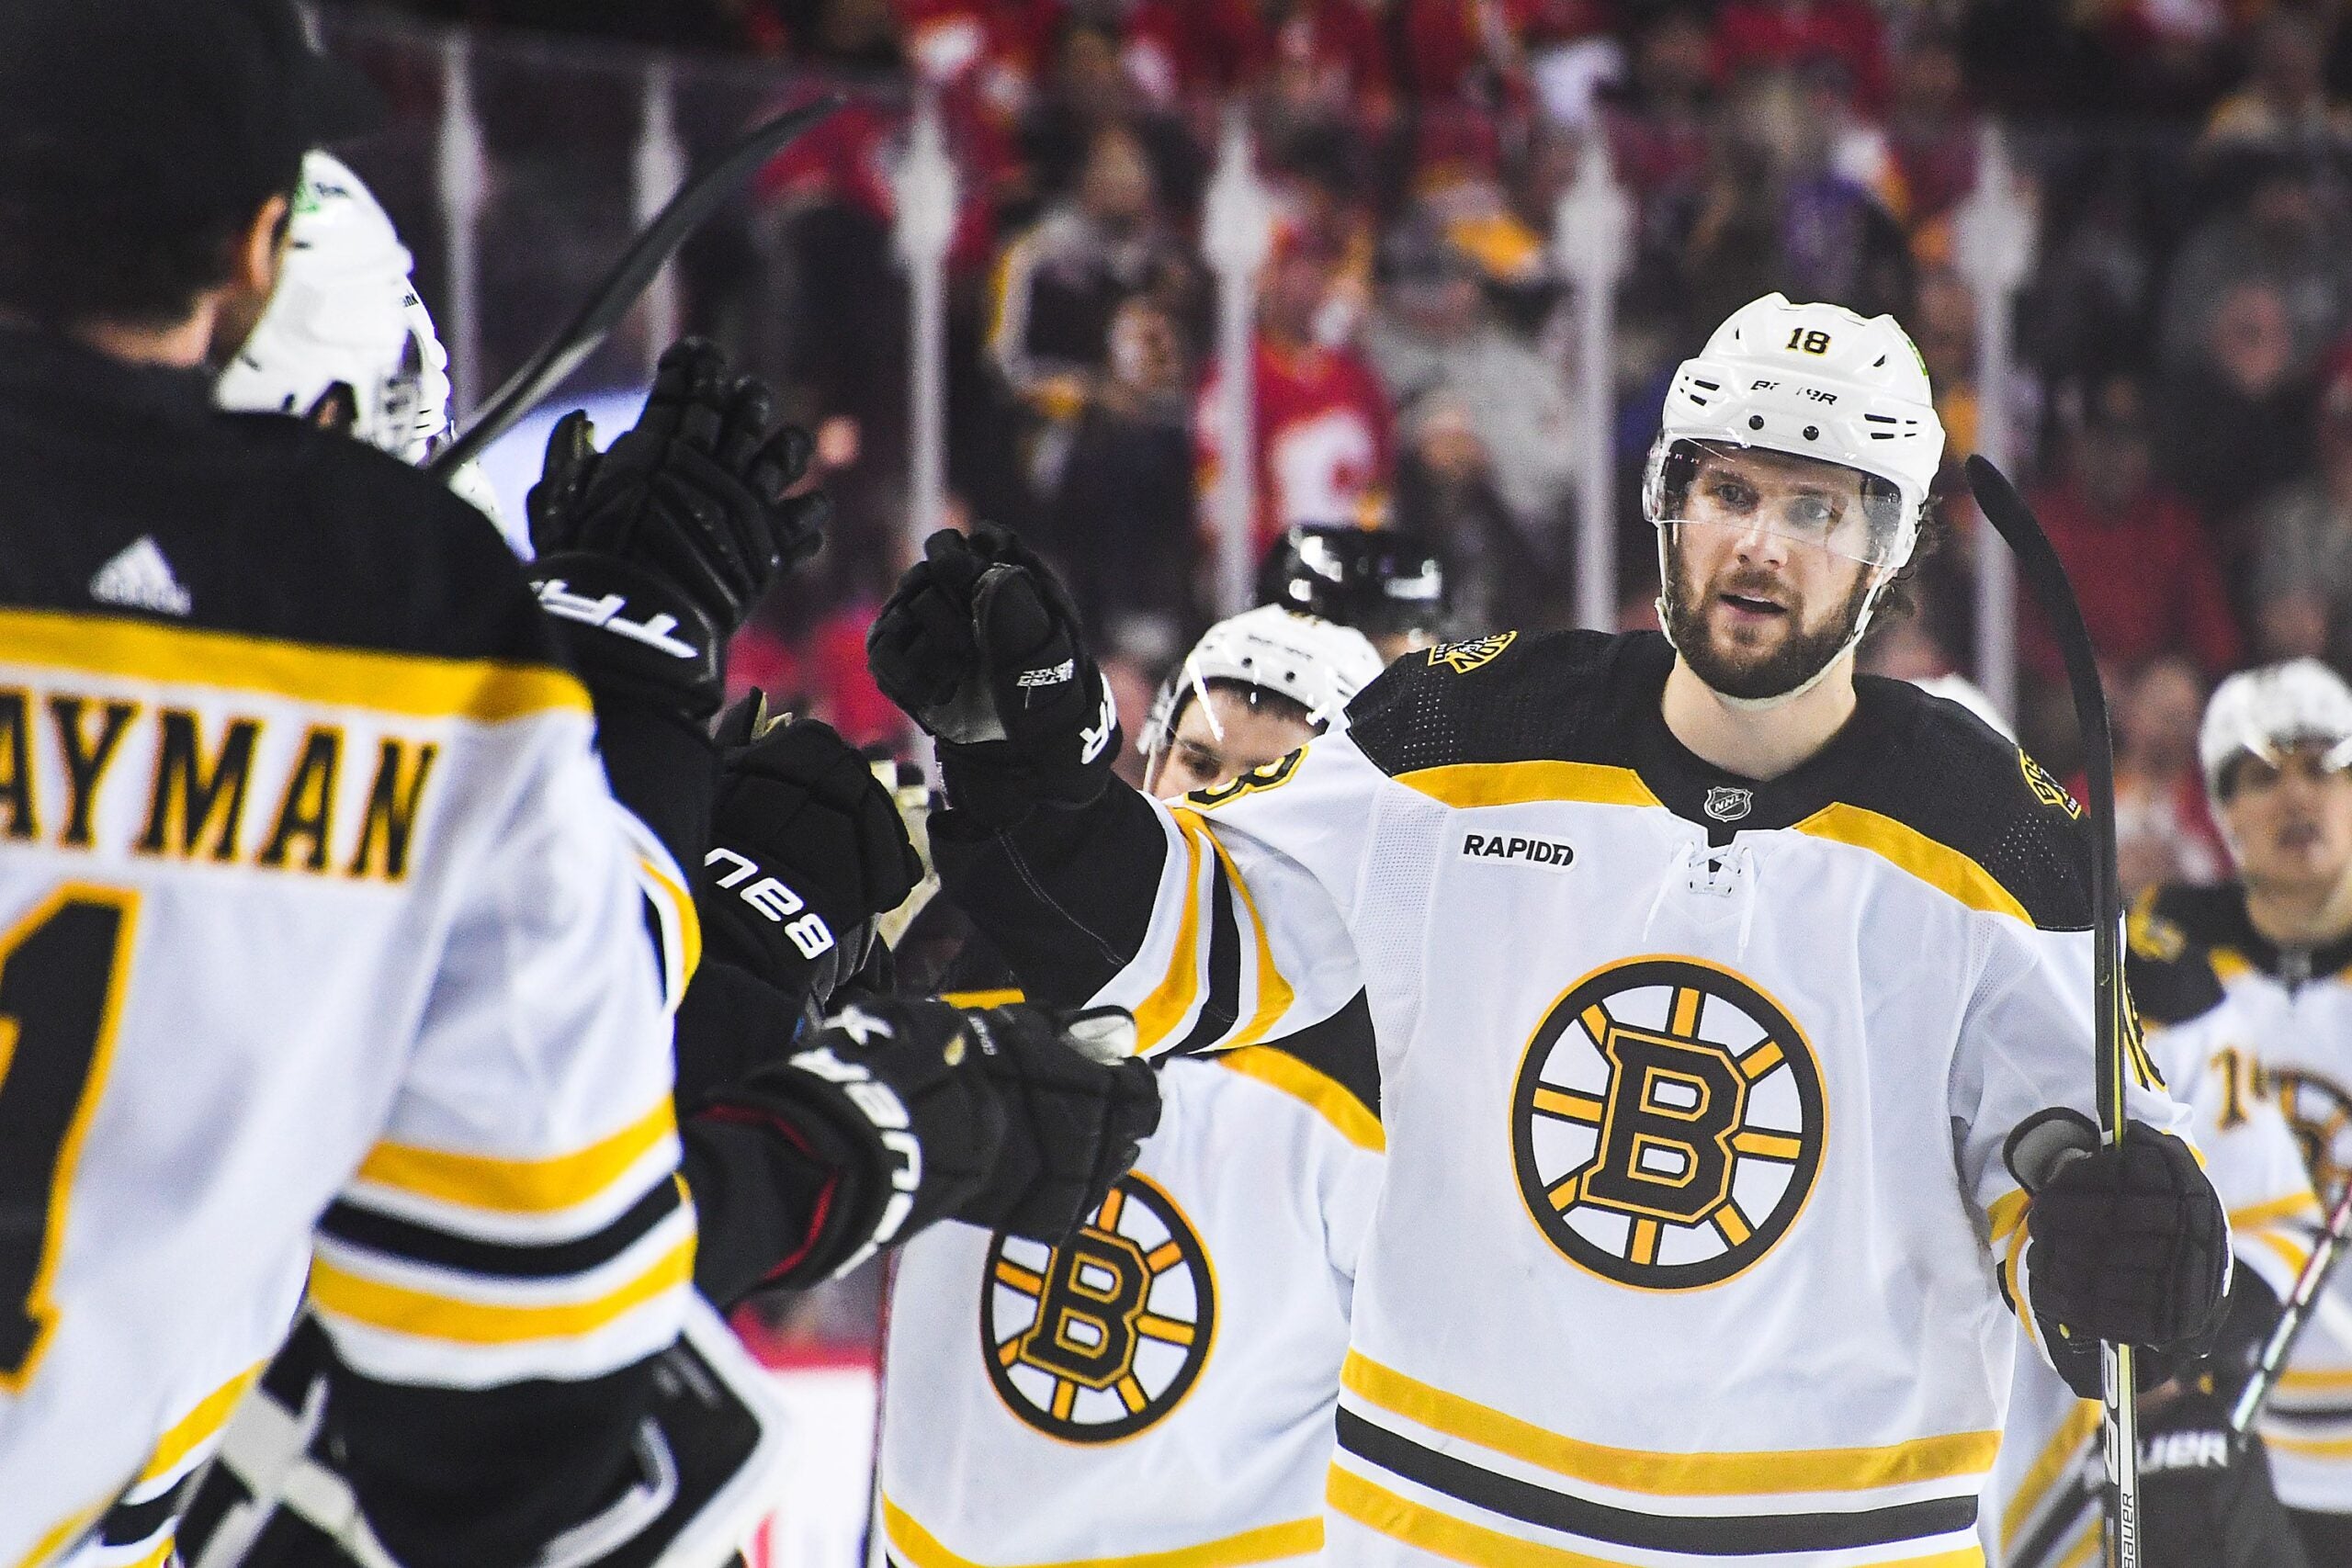 Pavel Zacha #18 of the Boston Bruins celebrates with his team after scoring in the third period forcing overtime against the Calgary Flames during an NHL game at Scotiabank Saddledome on February 28, 2023 in Calgary, Alberta, Canada.